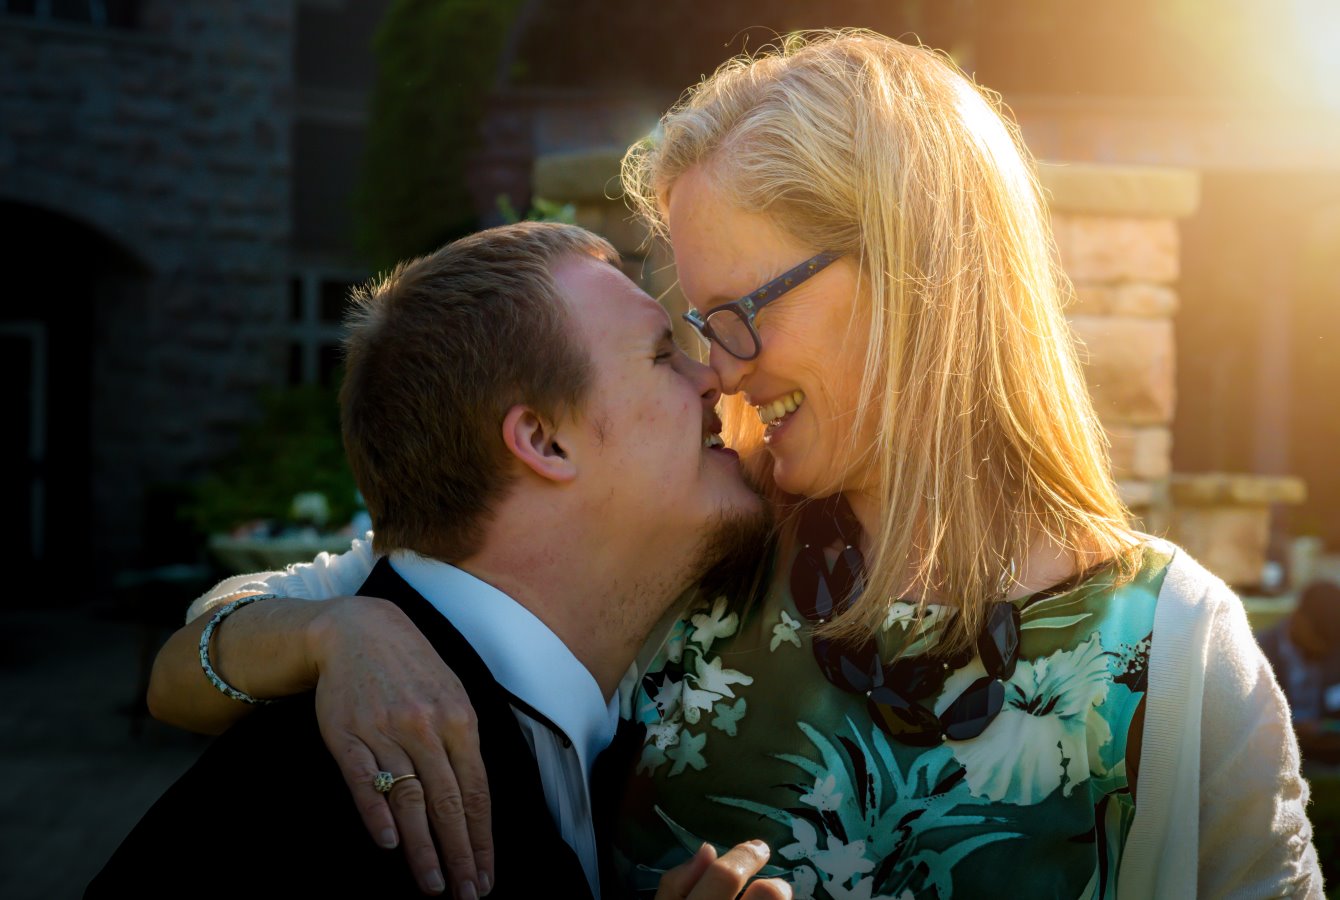 A mother and son wearing dress clothes stand looking at each other nose-to-nose, with sunlight illuminating them from the upper right corner.